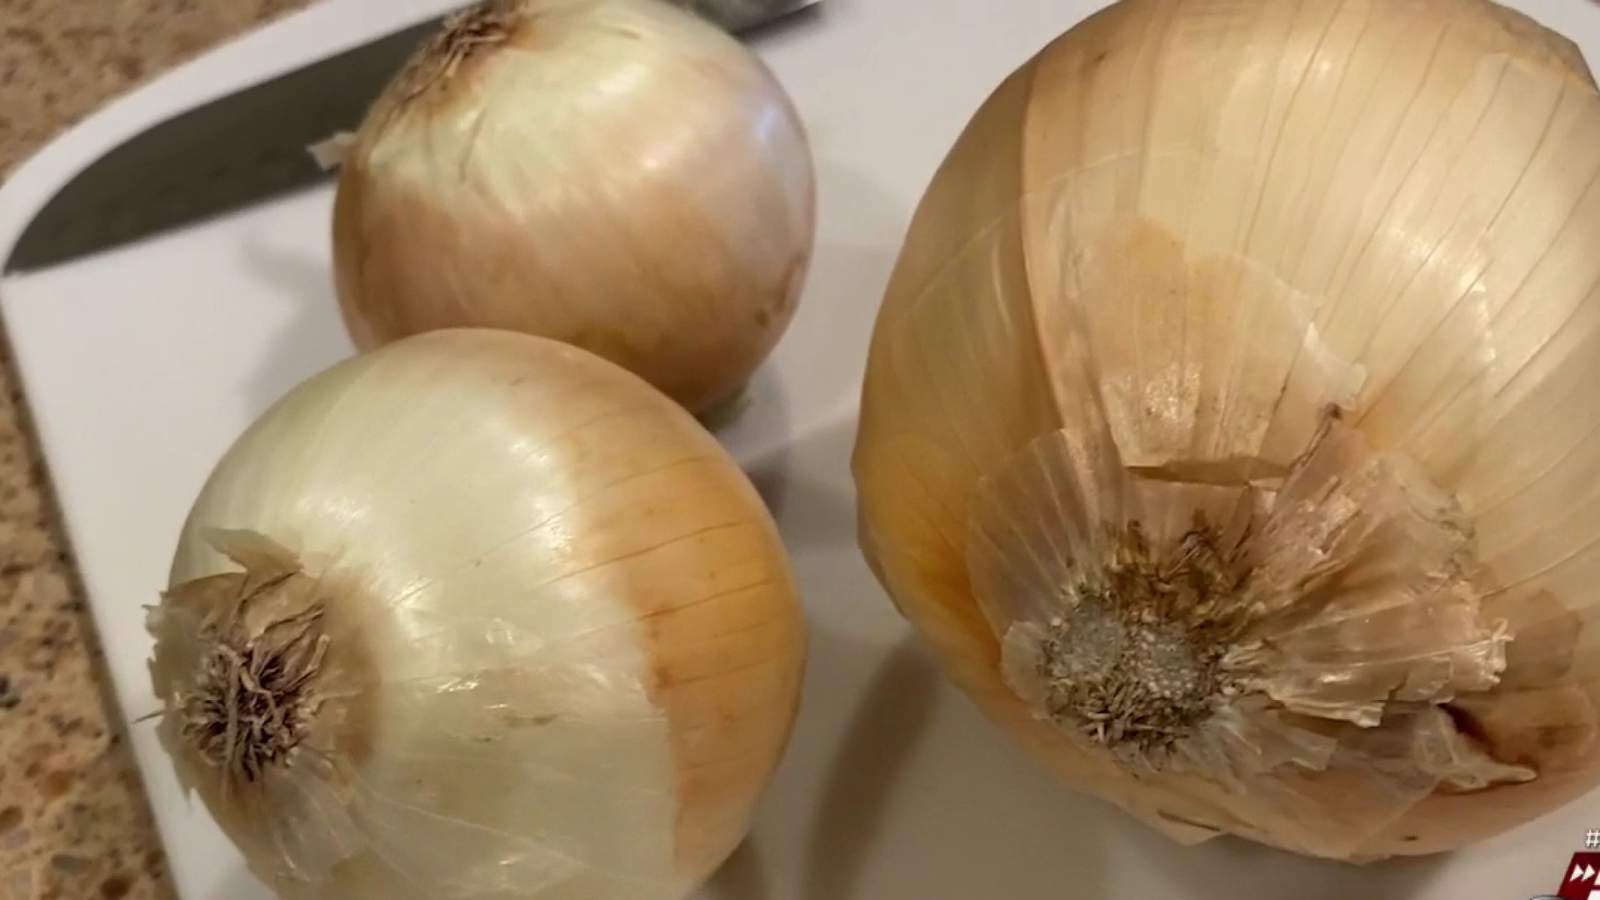 Onions used by Hello Fresh voluntarily recalled for possible presence of salmonella